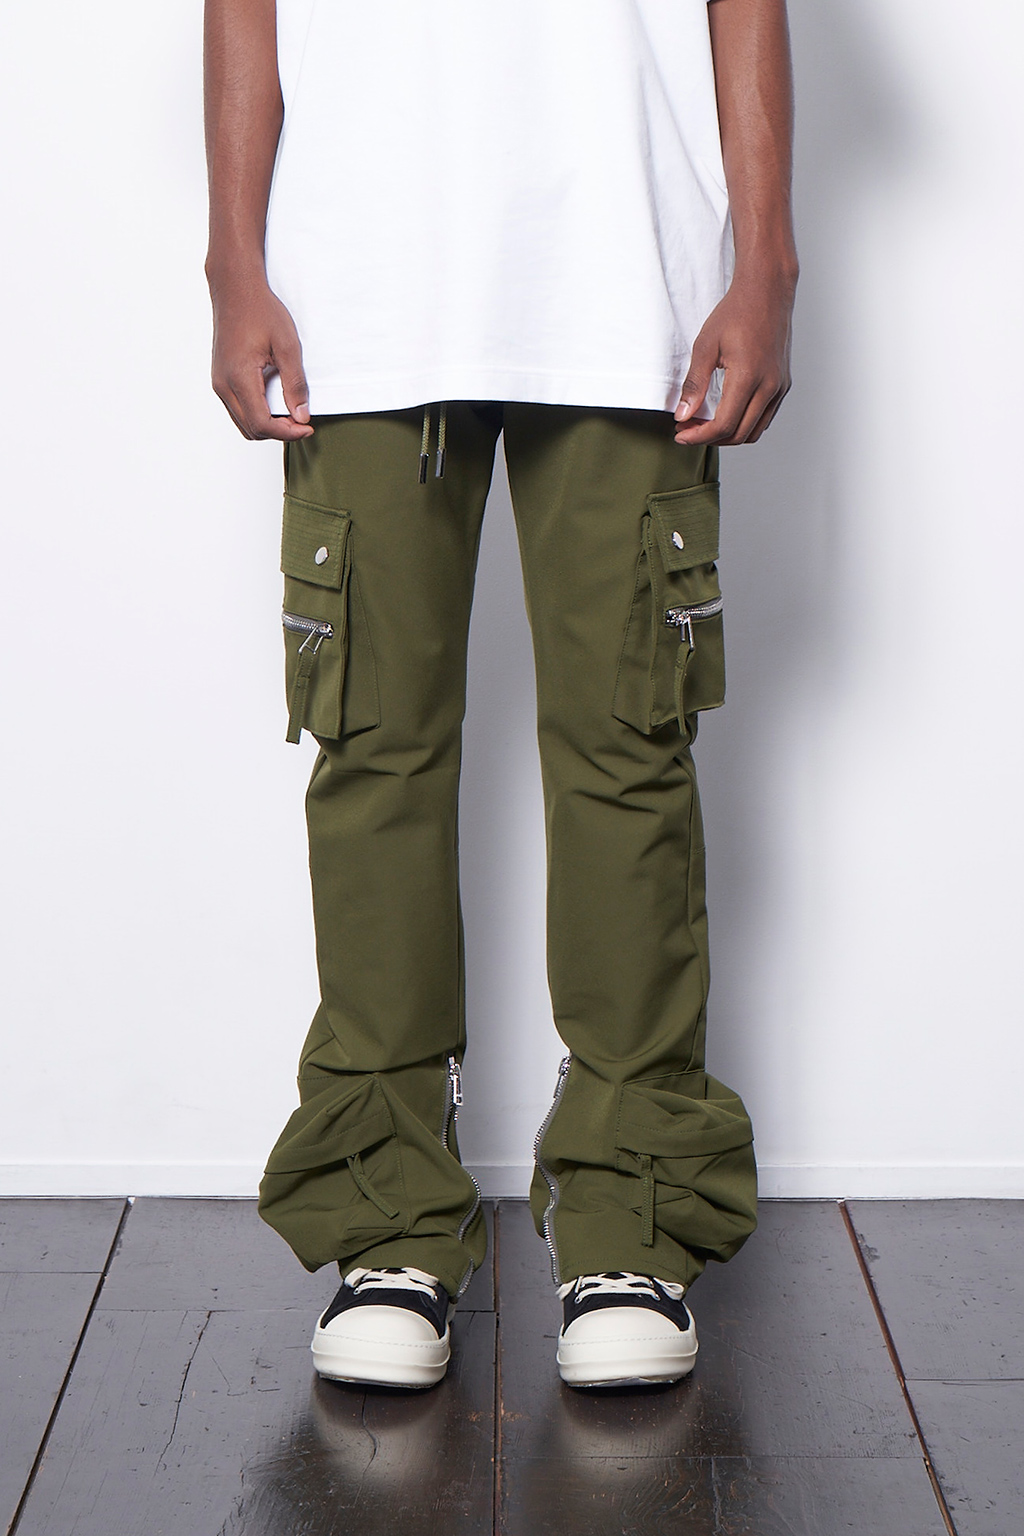 TYPE-4 SLIM STRETCH CARGO PANTS - OLIVE - MLVINCE